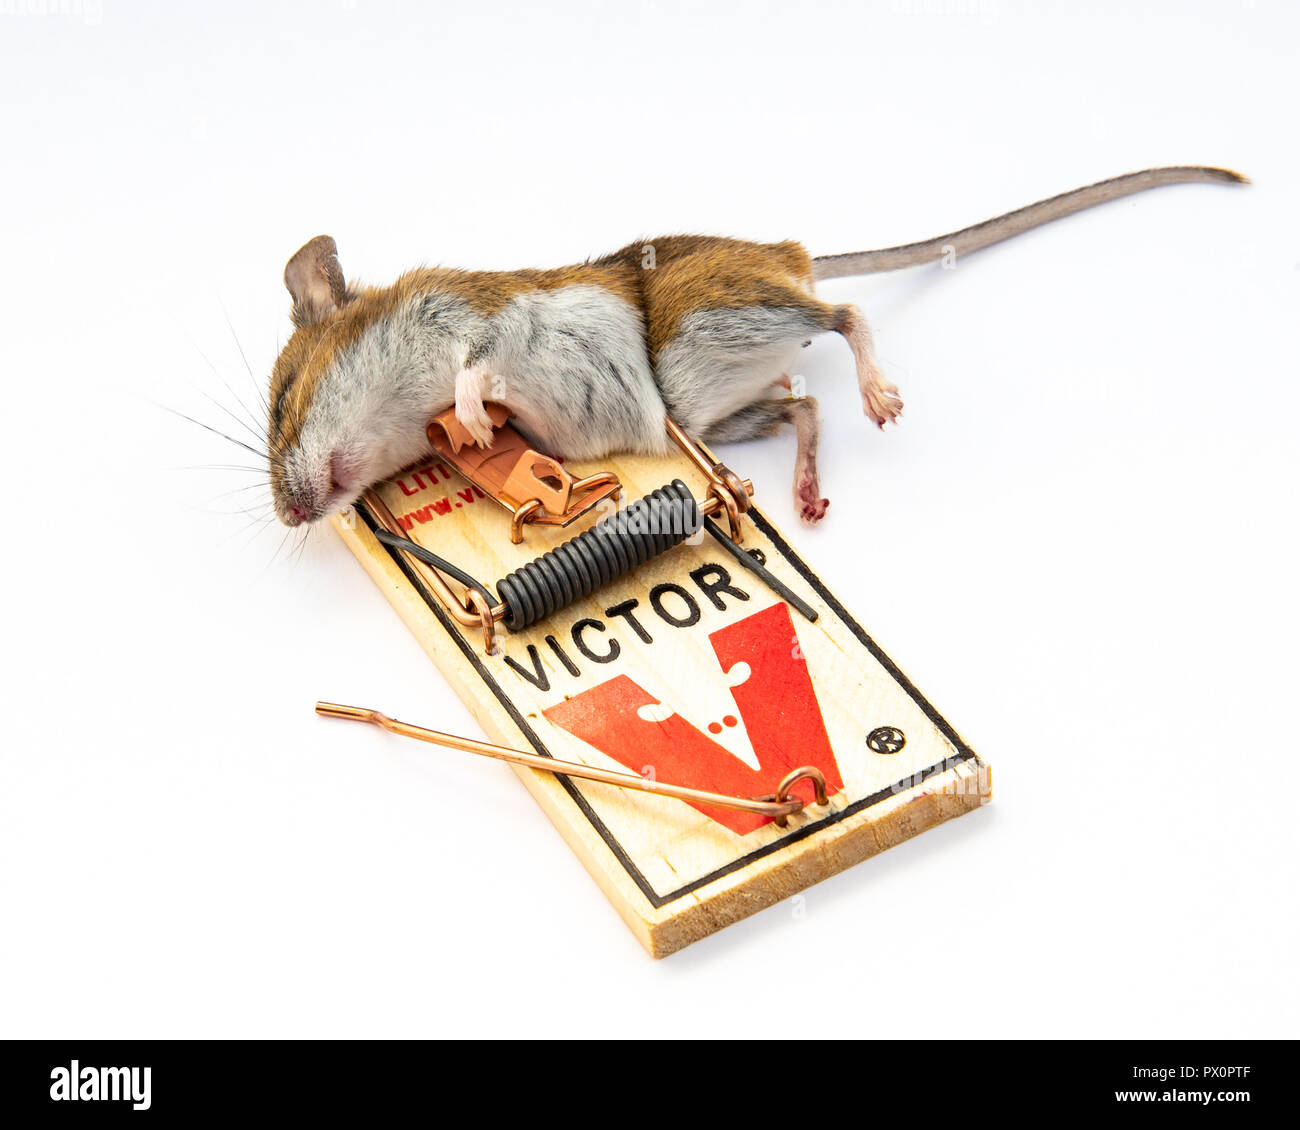 Mouse Released From Humane Mouse Trap Stock Photo - Download Image Now -  Mousetrap, Agricultural Field, Animal - iStock